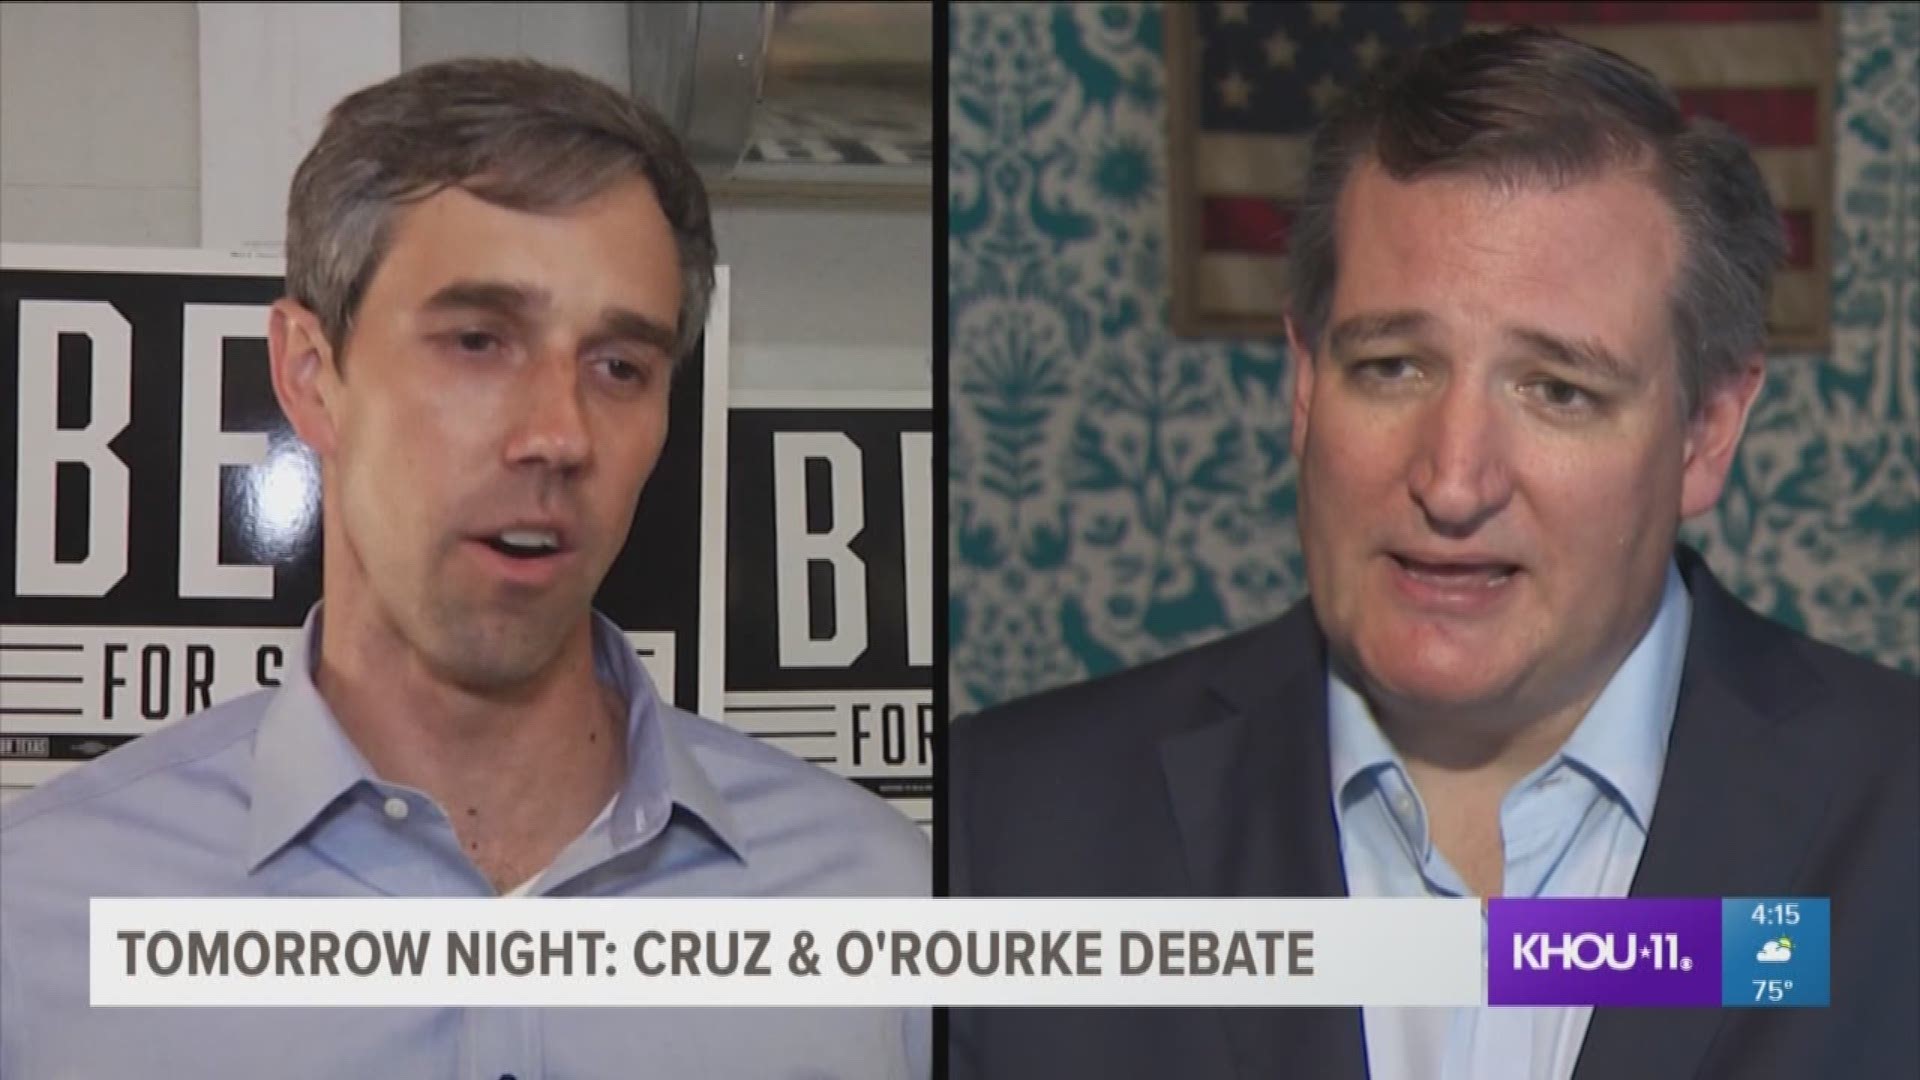 Senator Ted Cruz and Congressman Beto O'Rourke will meet for the first of three debates on Friday in Dallas.